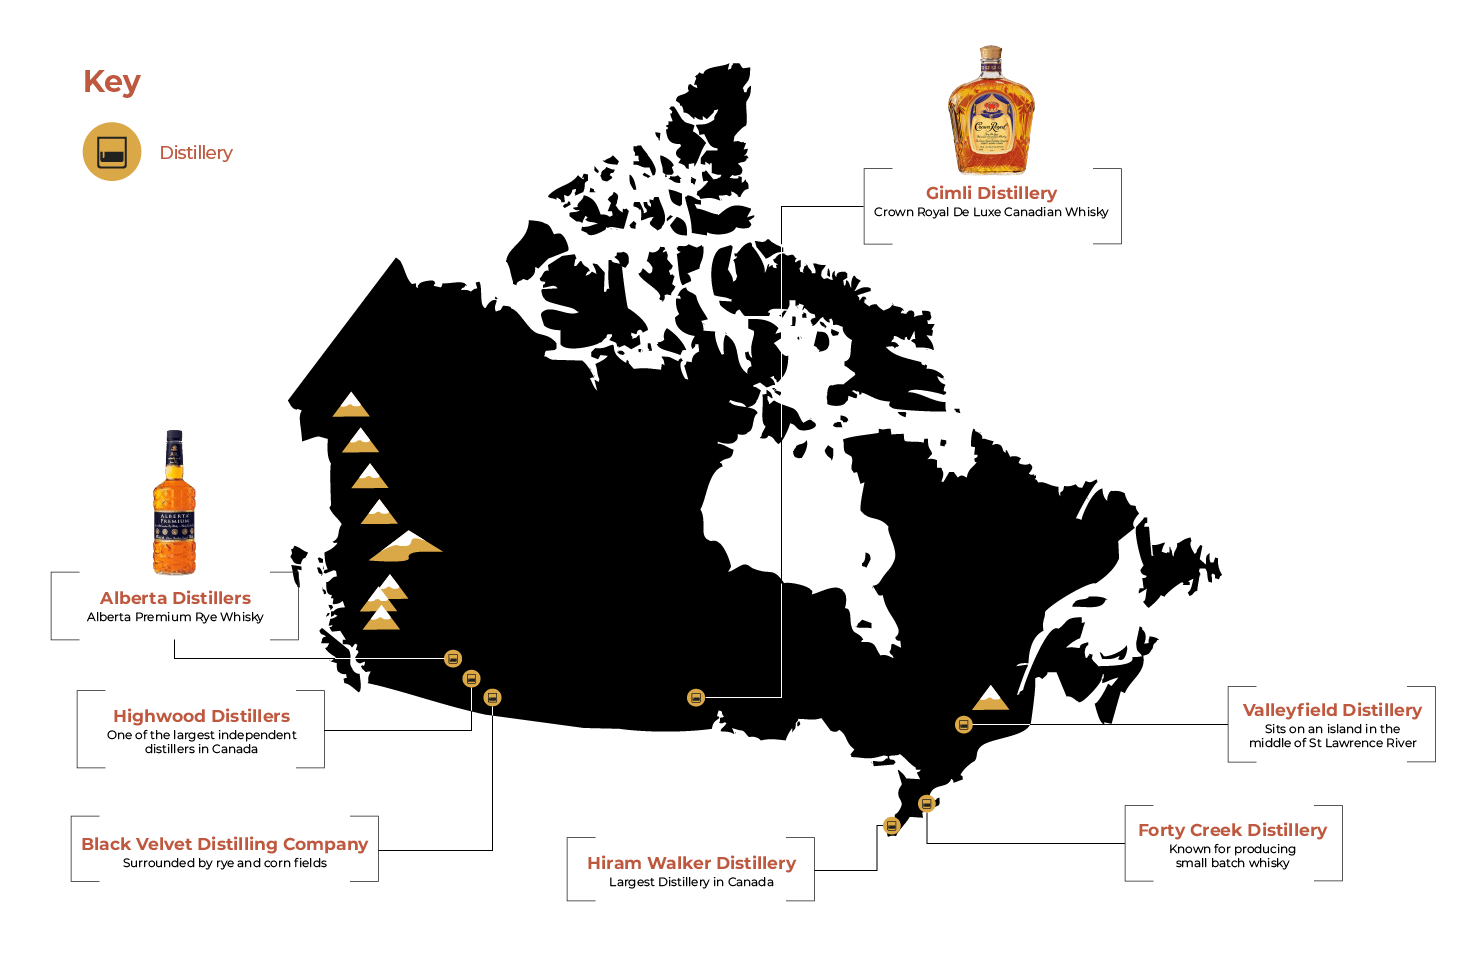 canadian-whisky-distilleries.png (1470×960)